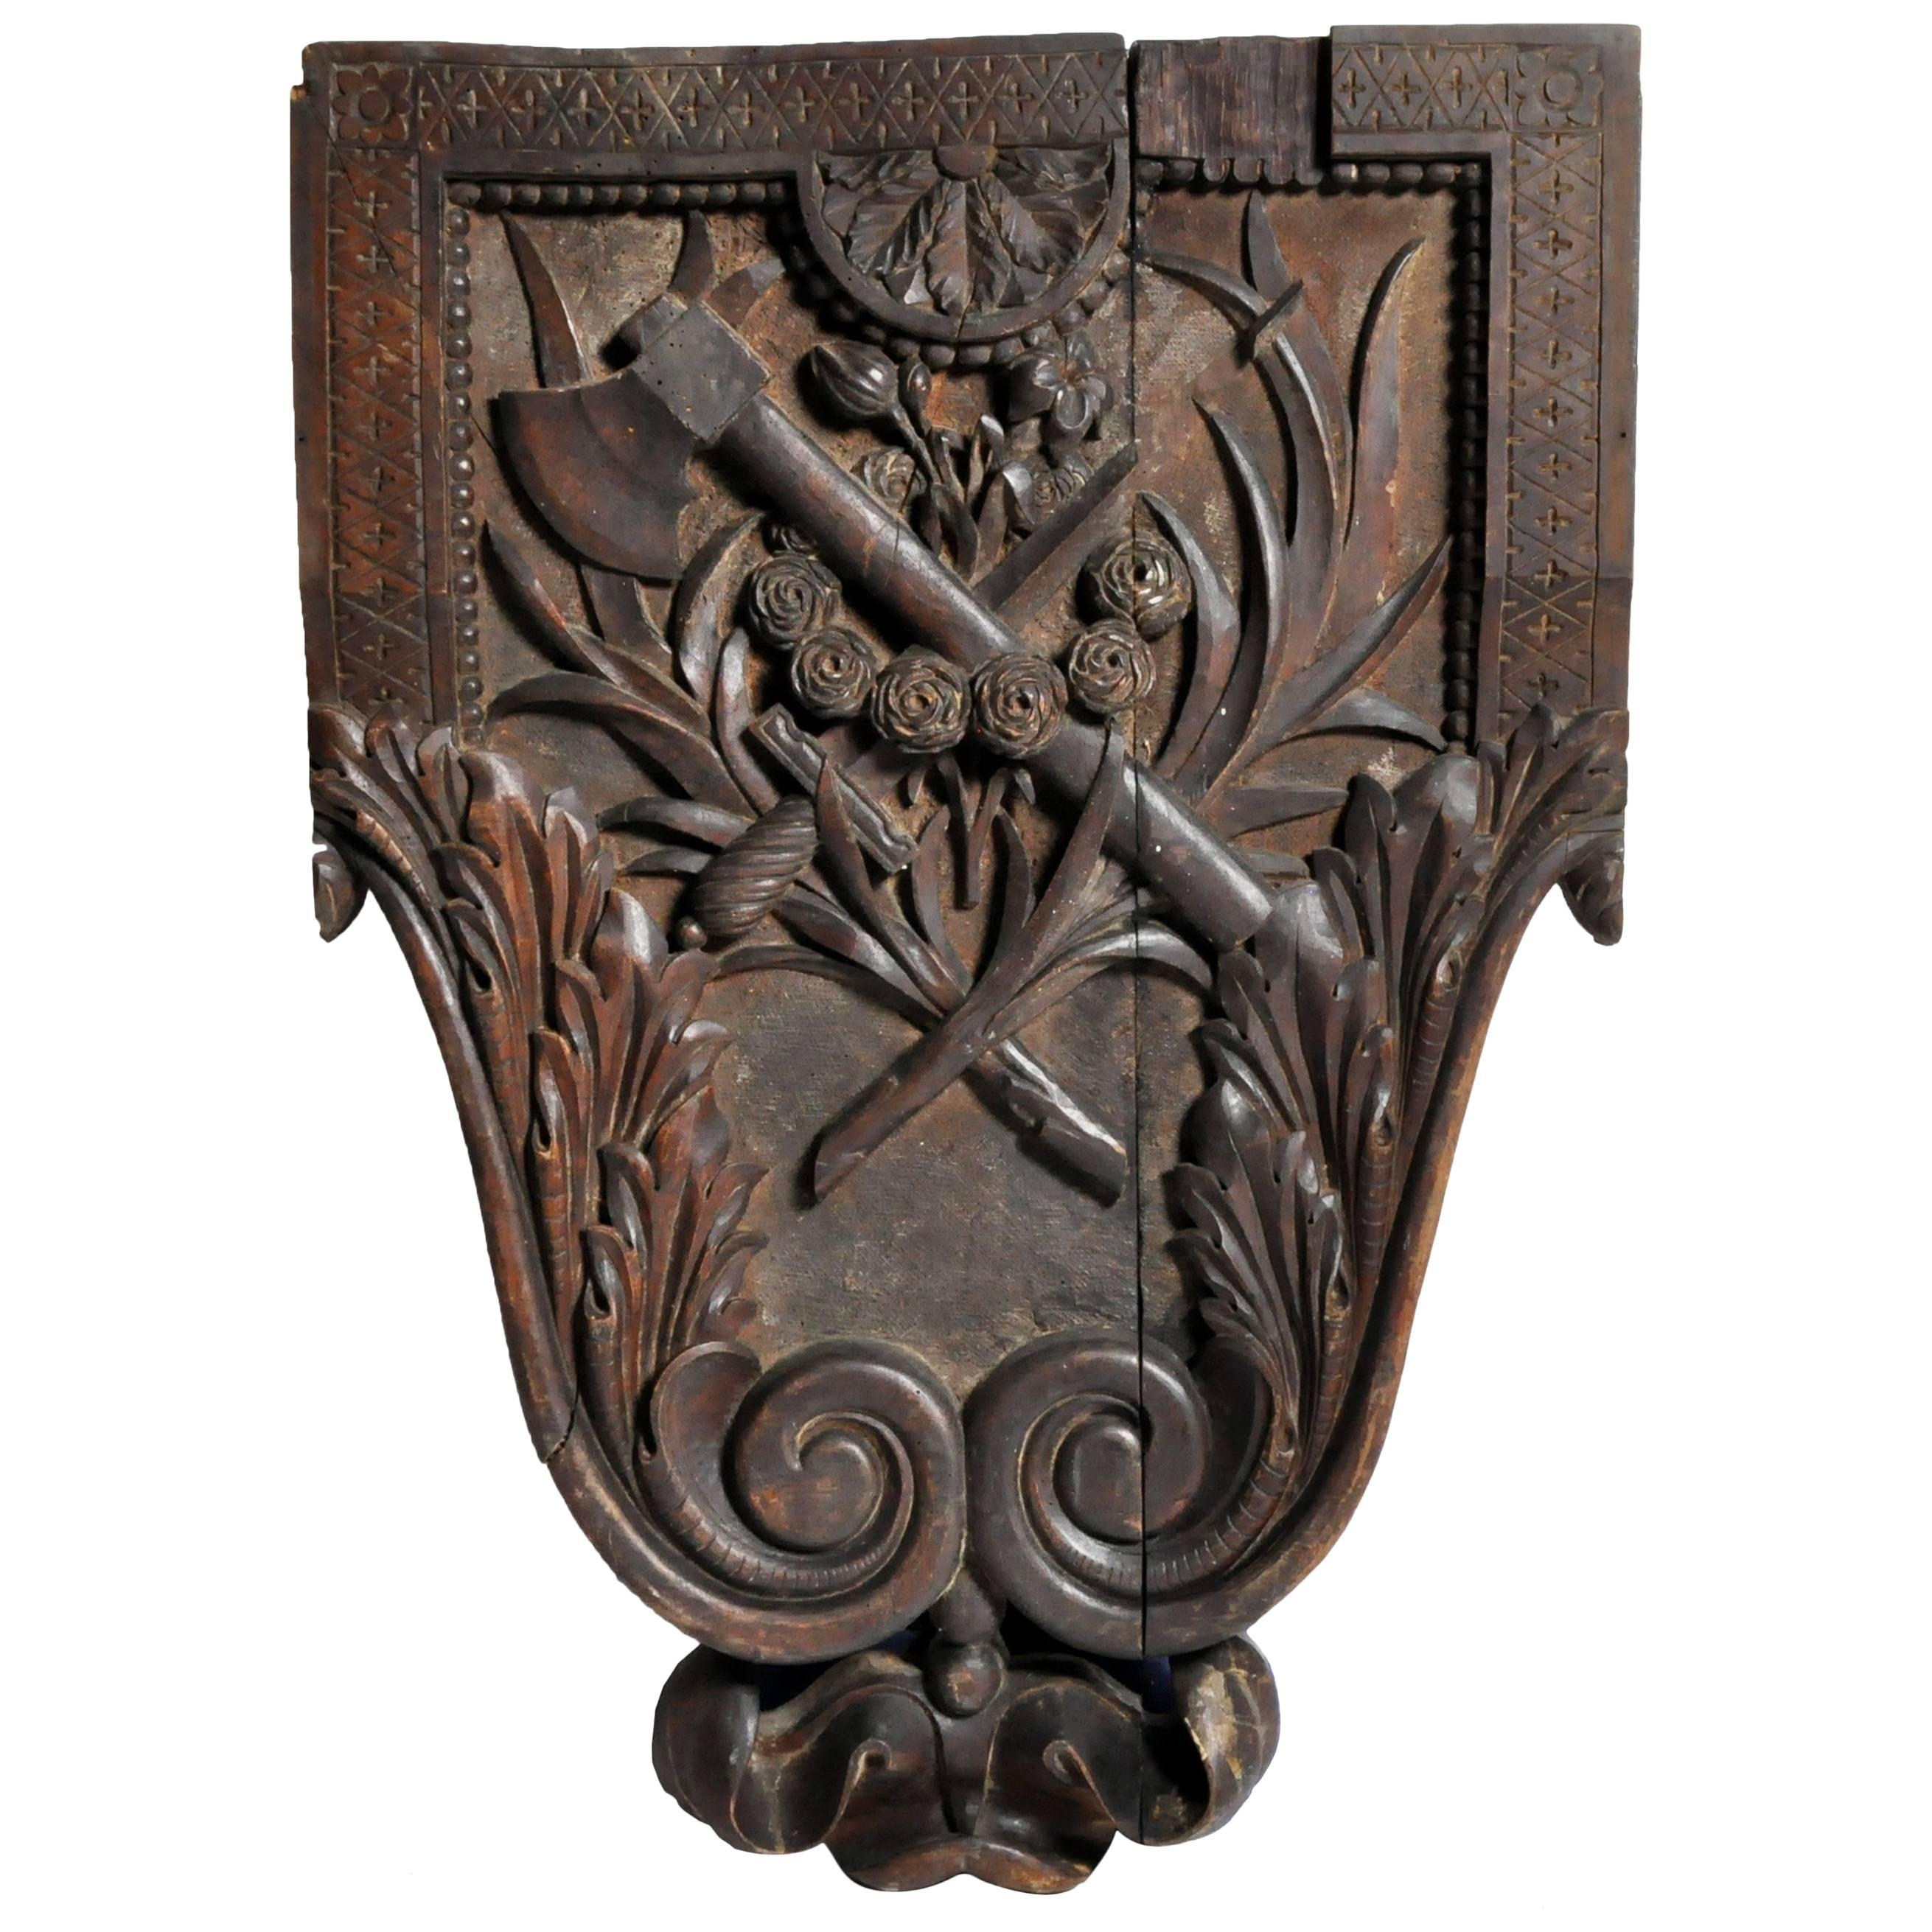 Hand-Carved Crest from a Chateau